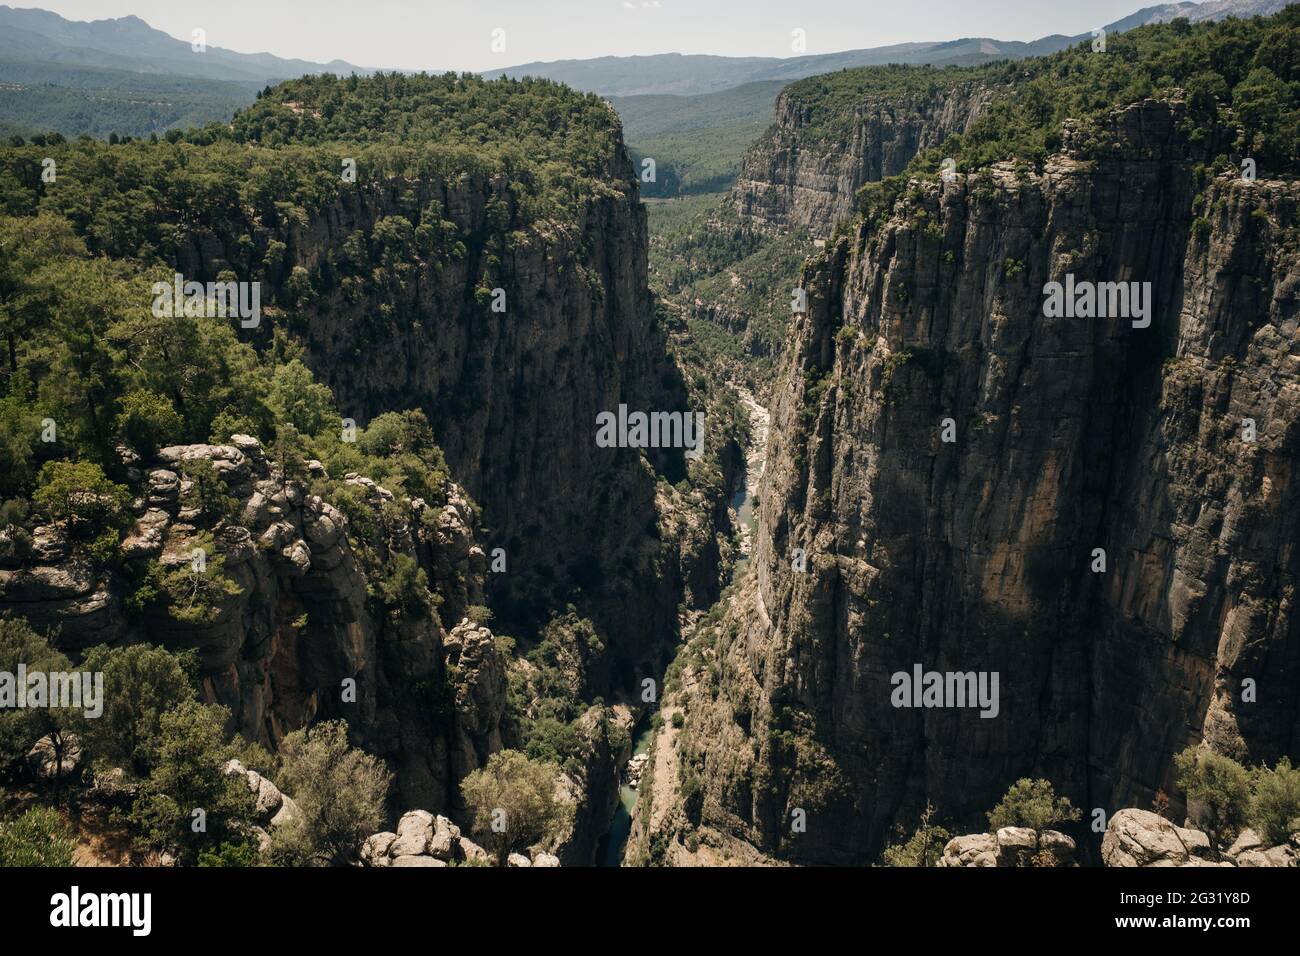 View from the top to the valley in Tazi Kanyonu Turkey Stock Photo